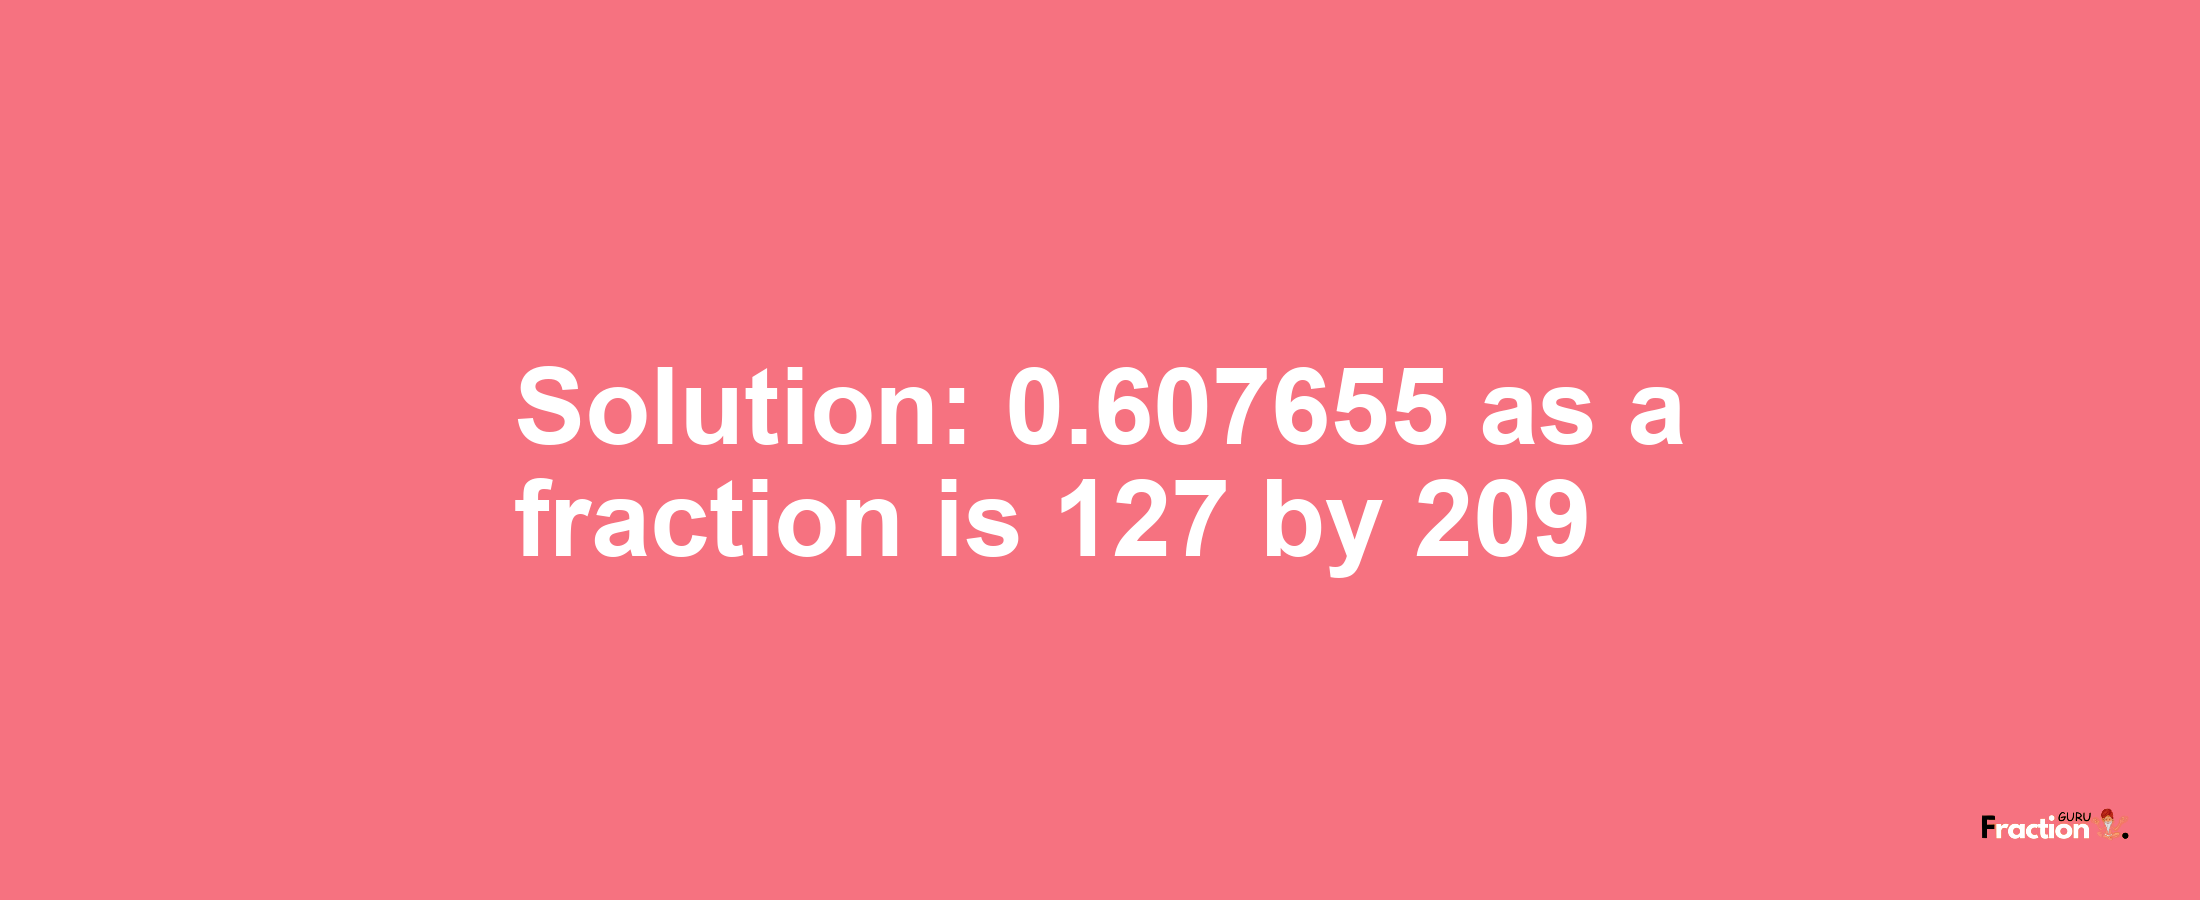 Solution:0.607655 as a fraction is 127/209